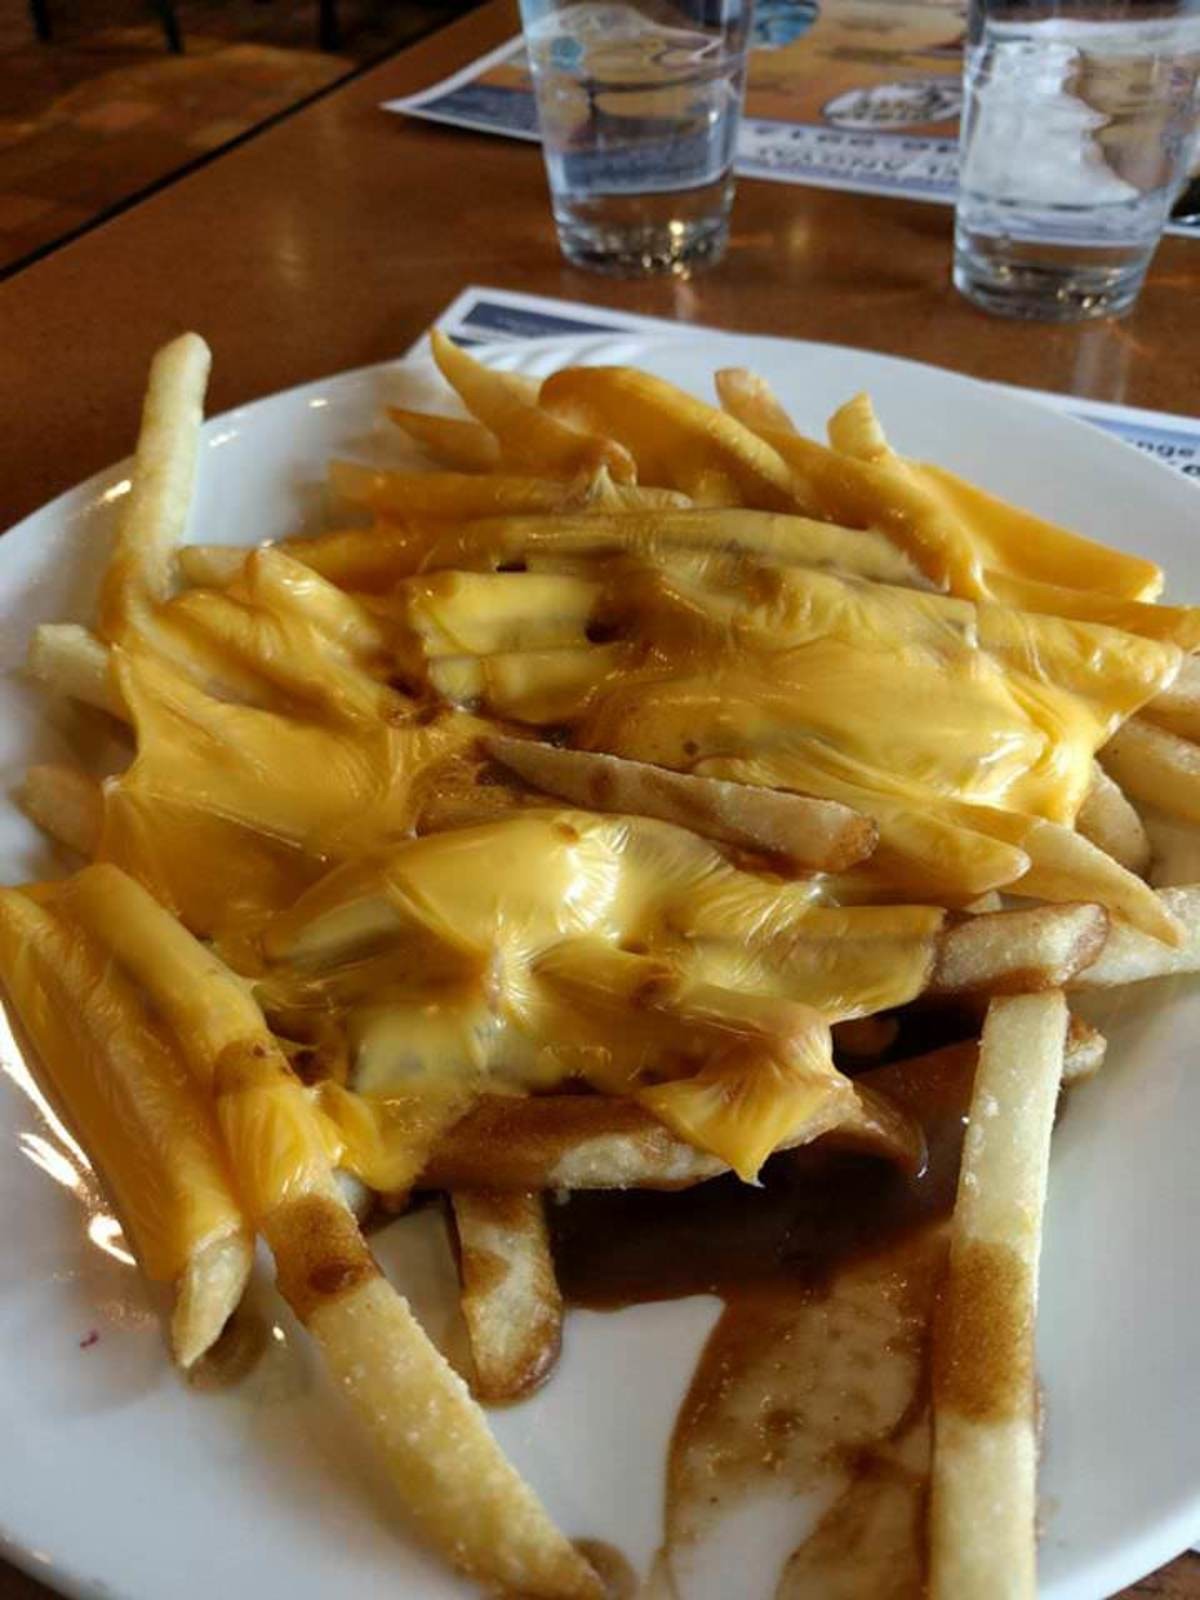 Hi America? We need to talk.. Someone ordered poutine in New Jersey and was served this abomination. If you are asked if you serve poutine, and you do not have 